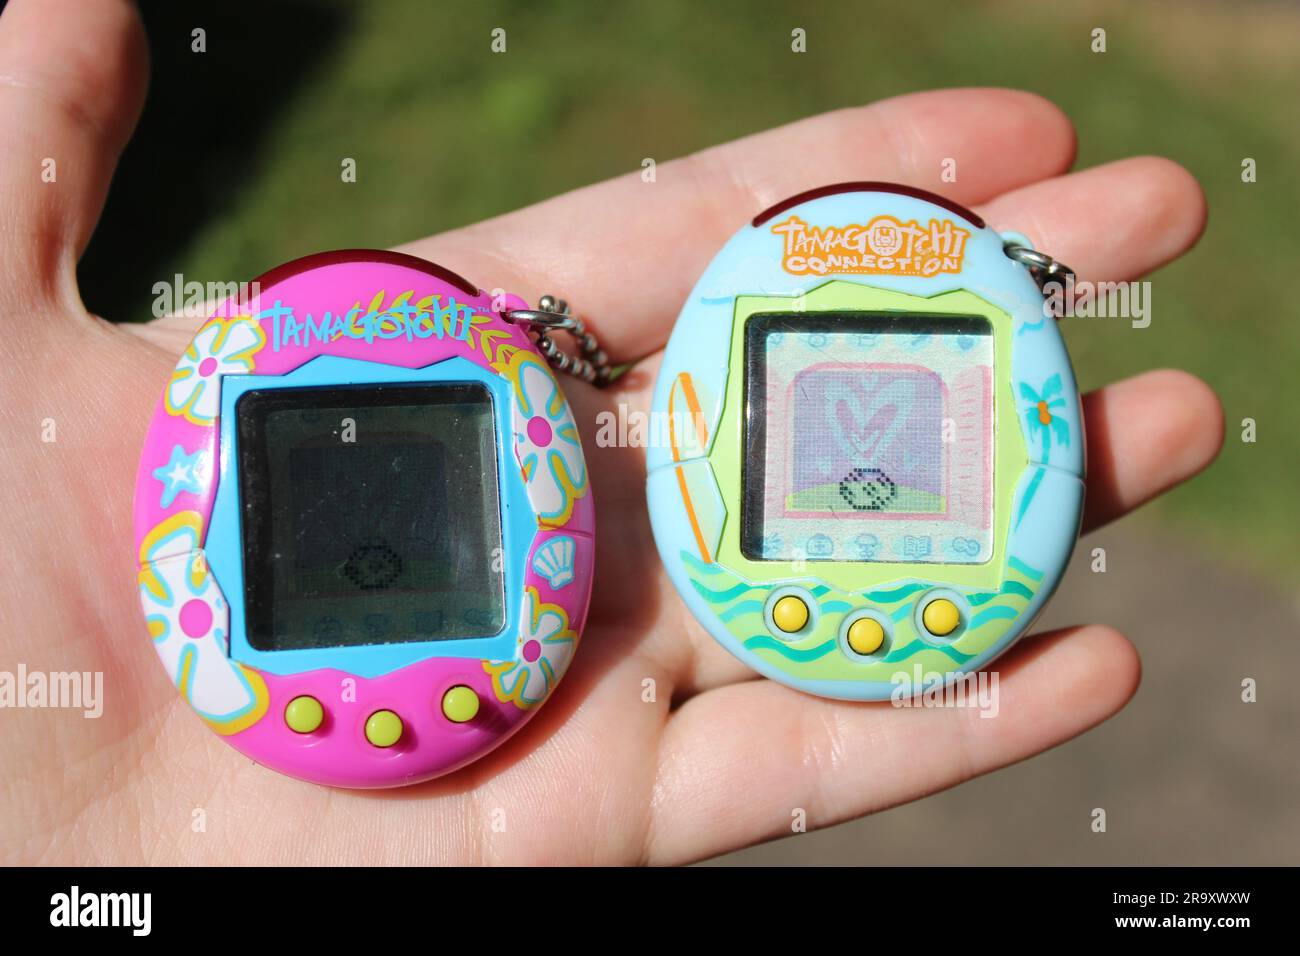 Two handheld tamagotchi devices, with pink and blue-green designs. Stock Photo